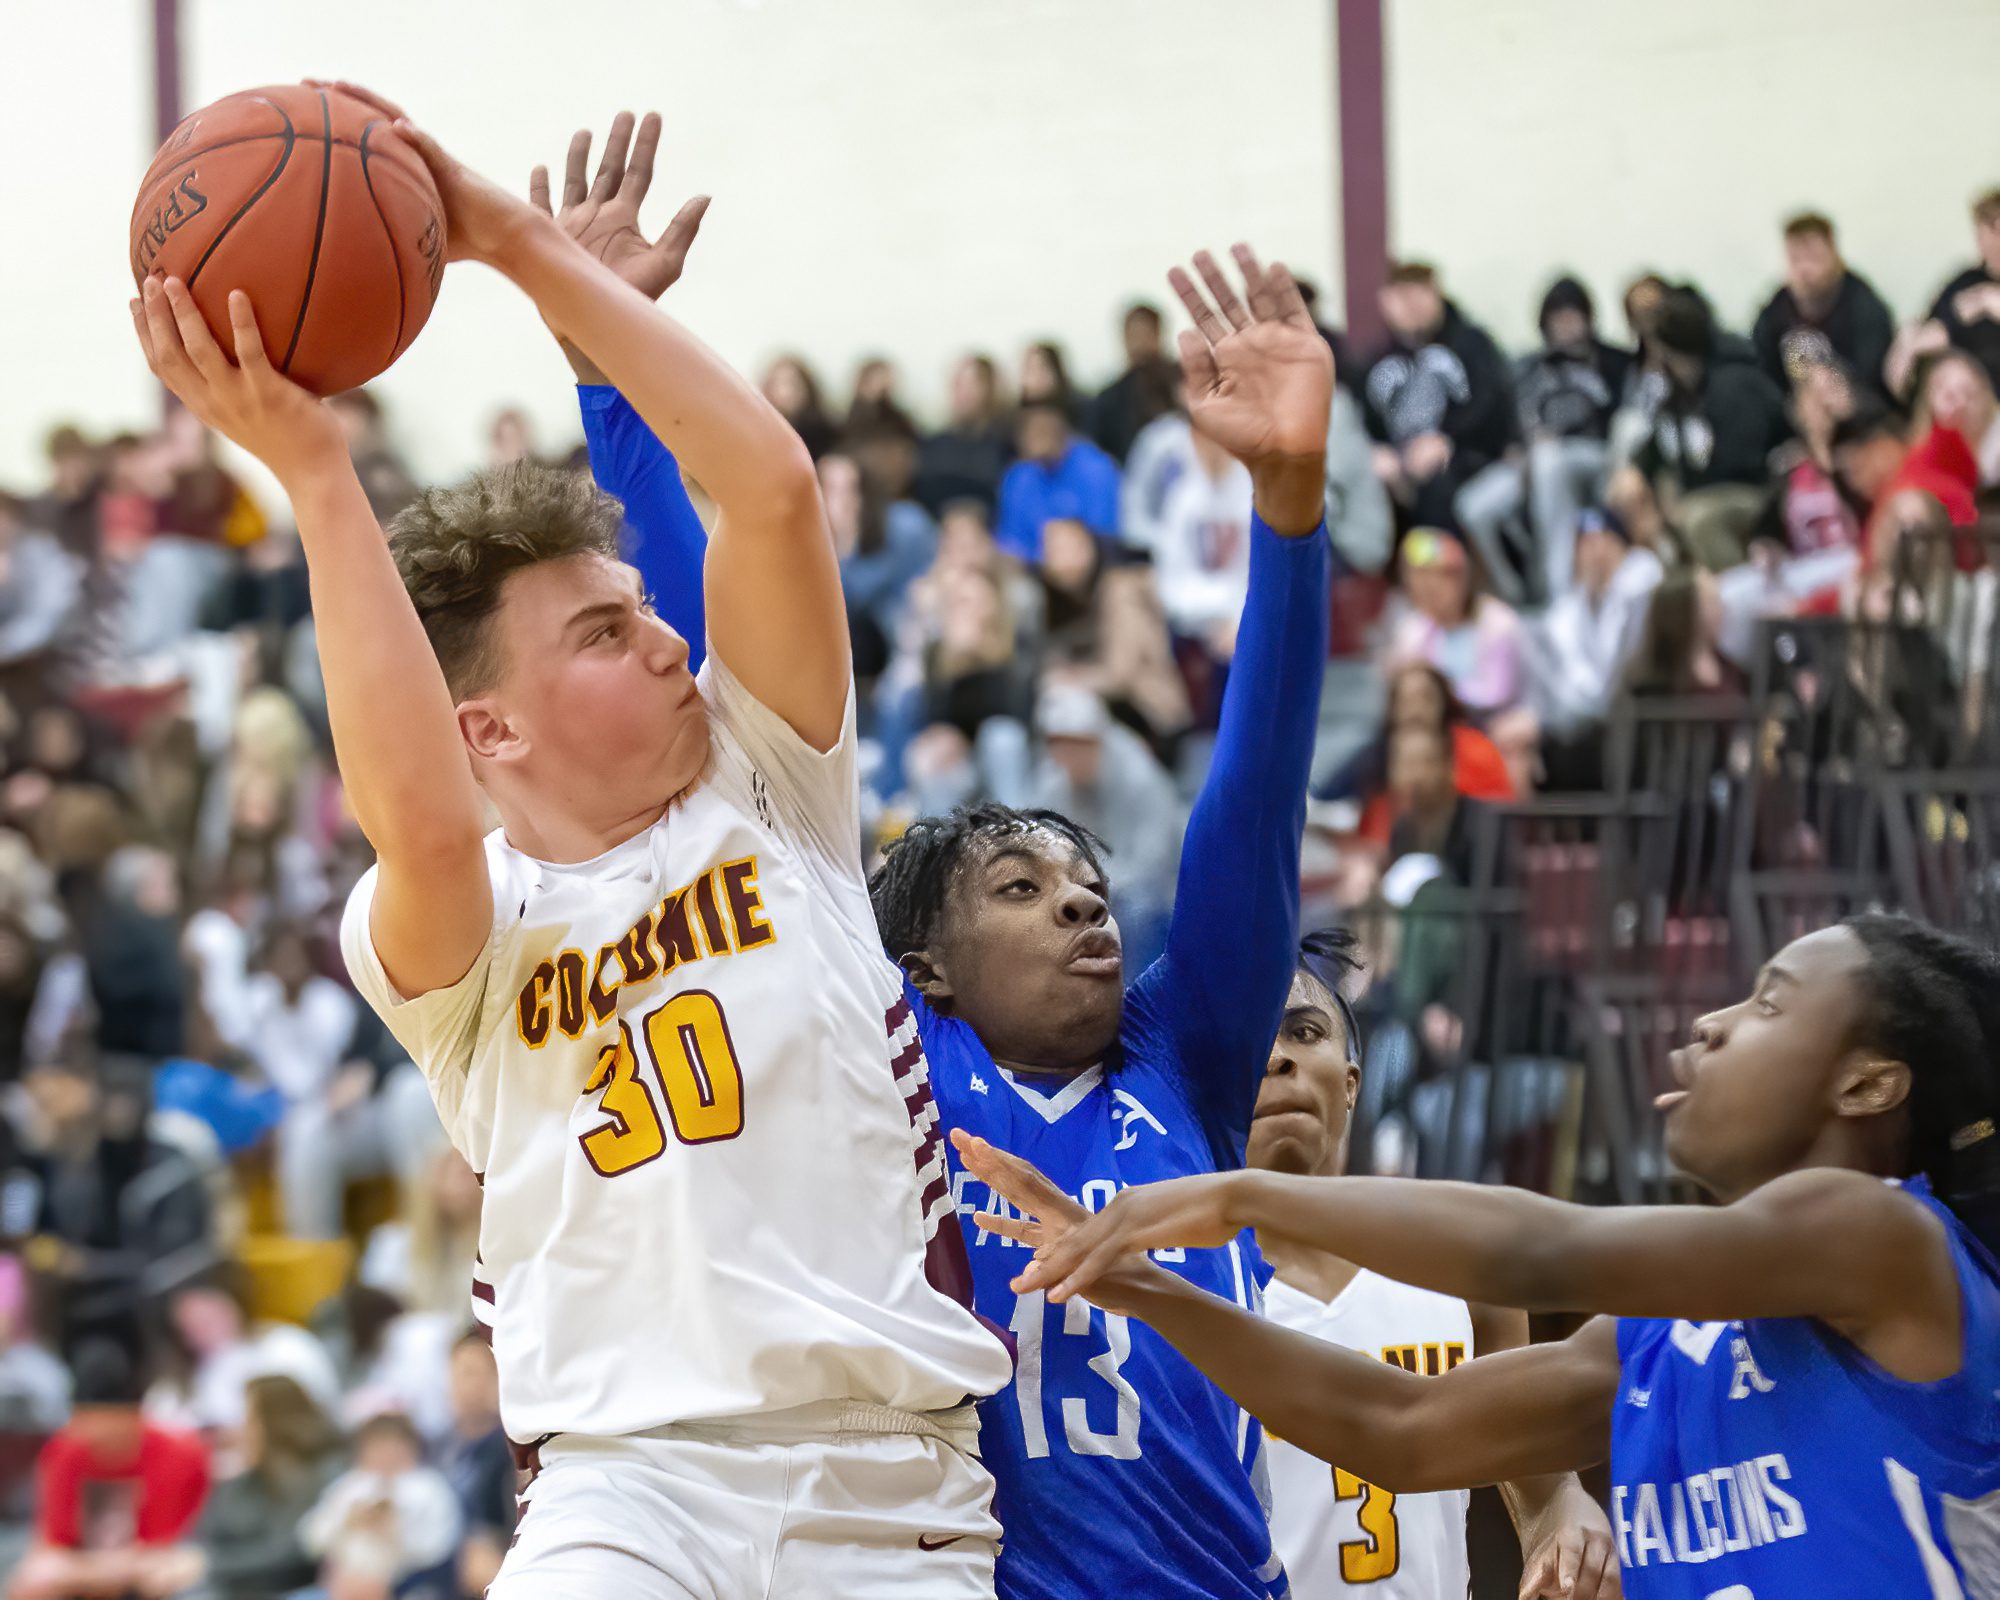 SPOTTED Albany vs Colonie boys basketball postponed due to medical emergency – rescheduled for tonight